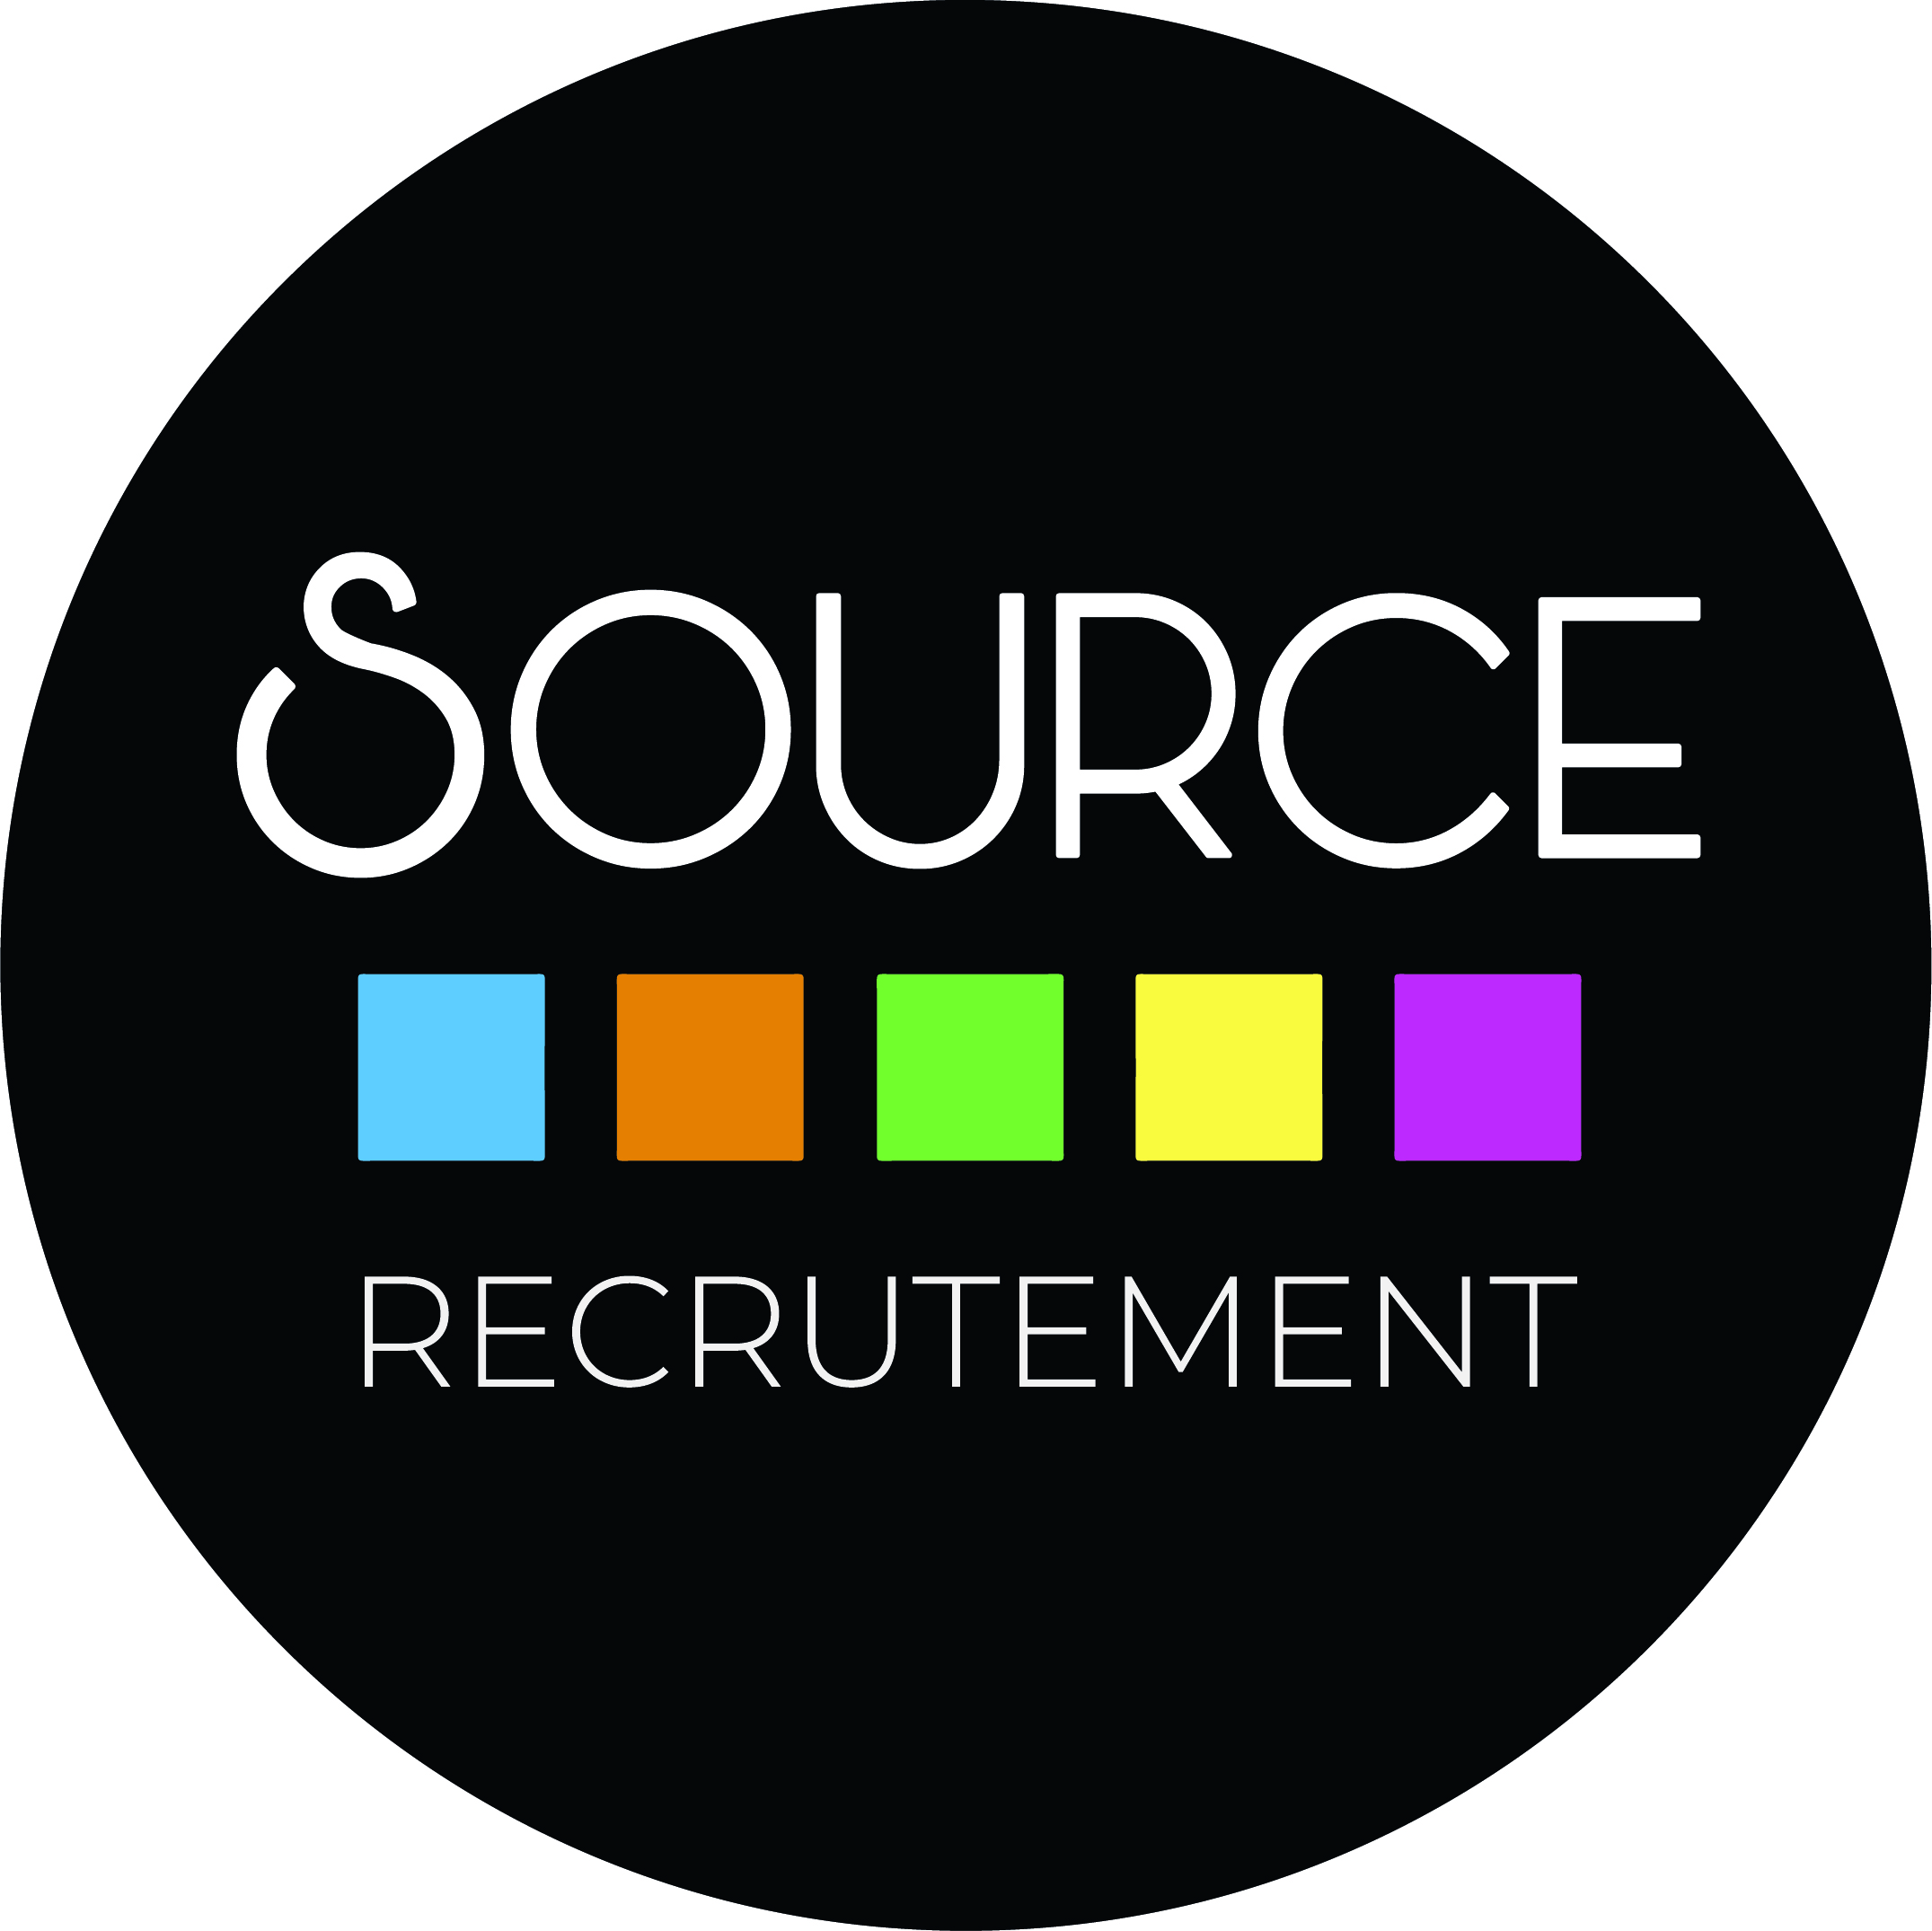 You are currently viewing SOURCE RECRUTEMENT